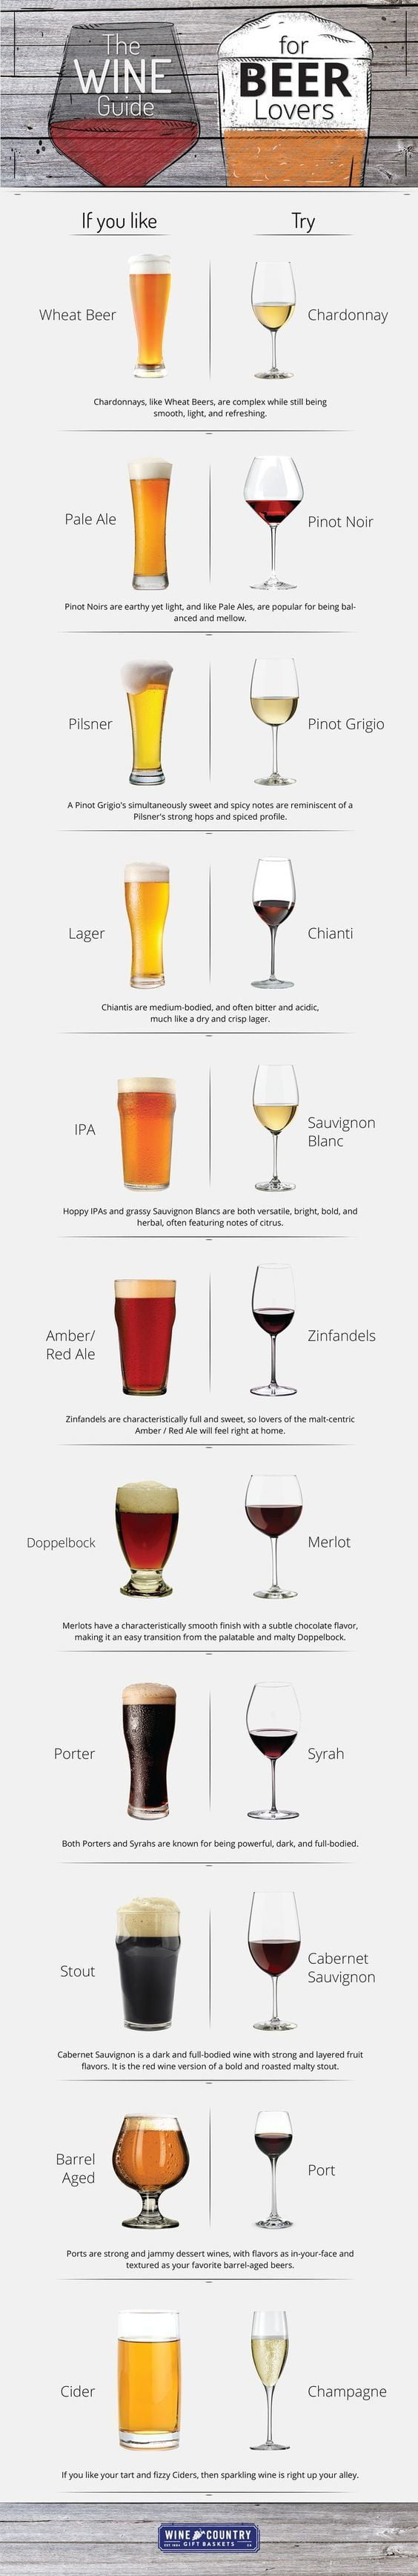 Wine guide for beer lovers (not mine)